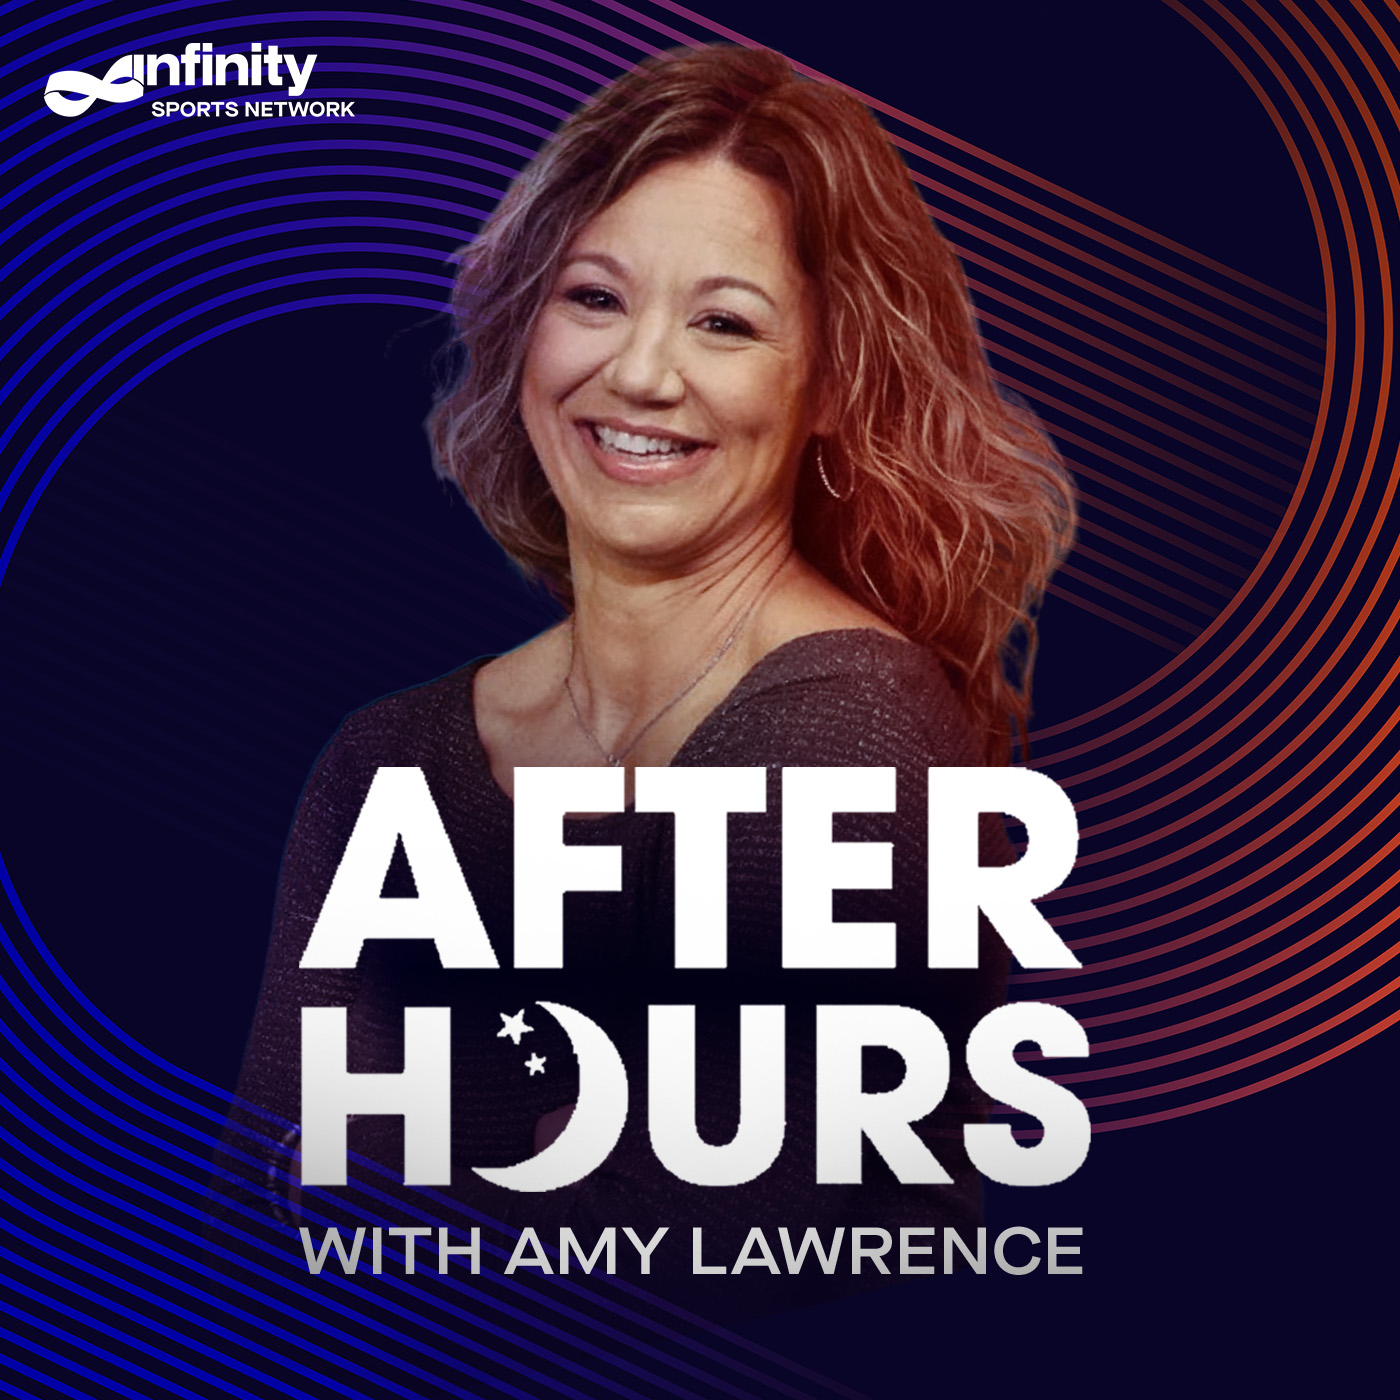 After Hours with Amy Lawrence - Andrew Fillipponi, 93.7TheFan Co-Host/CBS Sports Radio Host